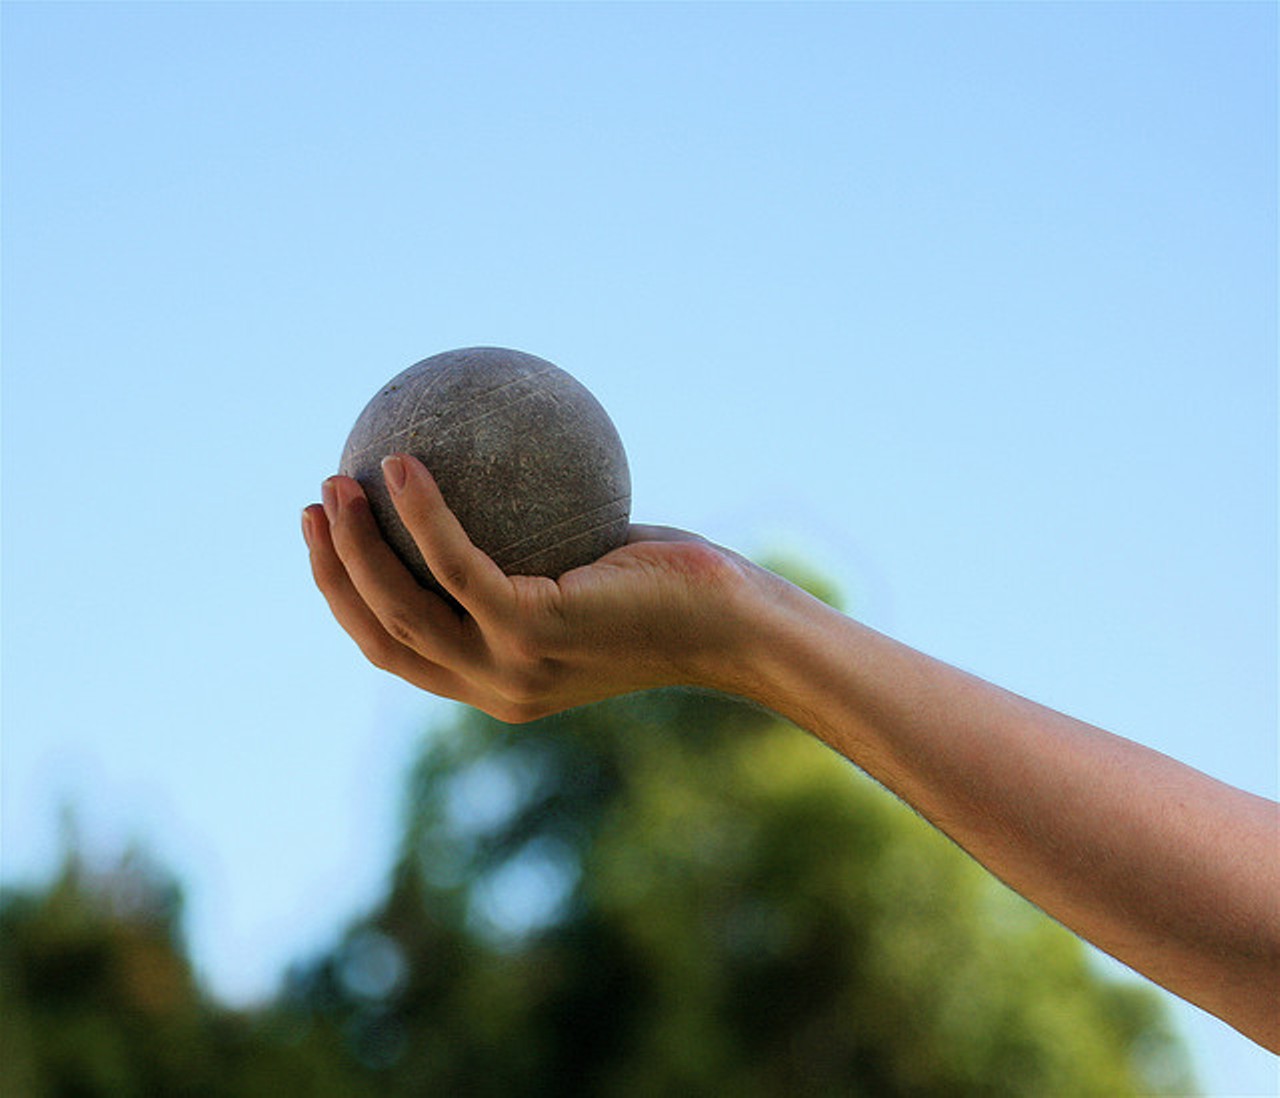 A perfectly thrown bocce ball at Milo's. Photo courtesy Flickr/Braden Kowitz